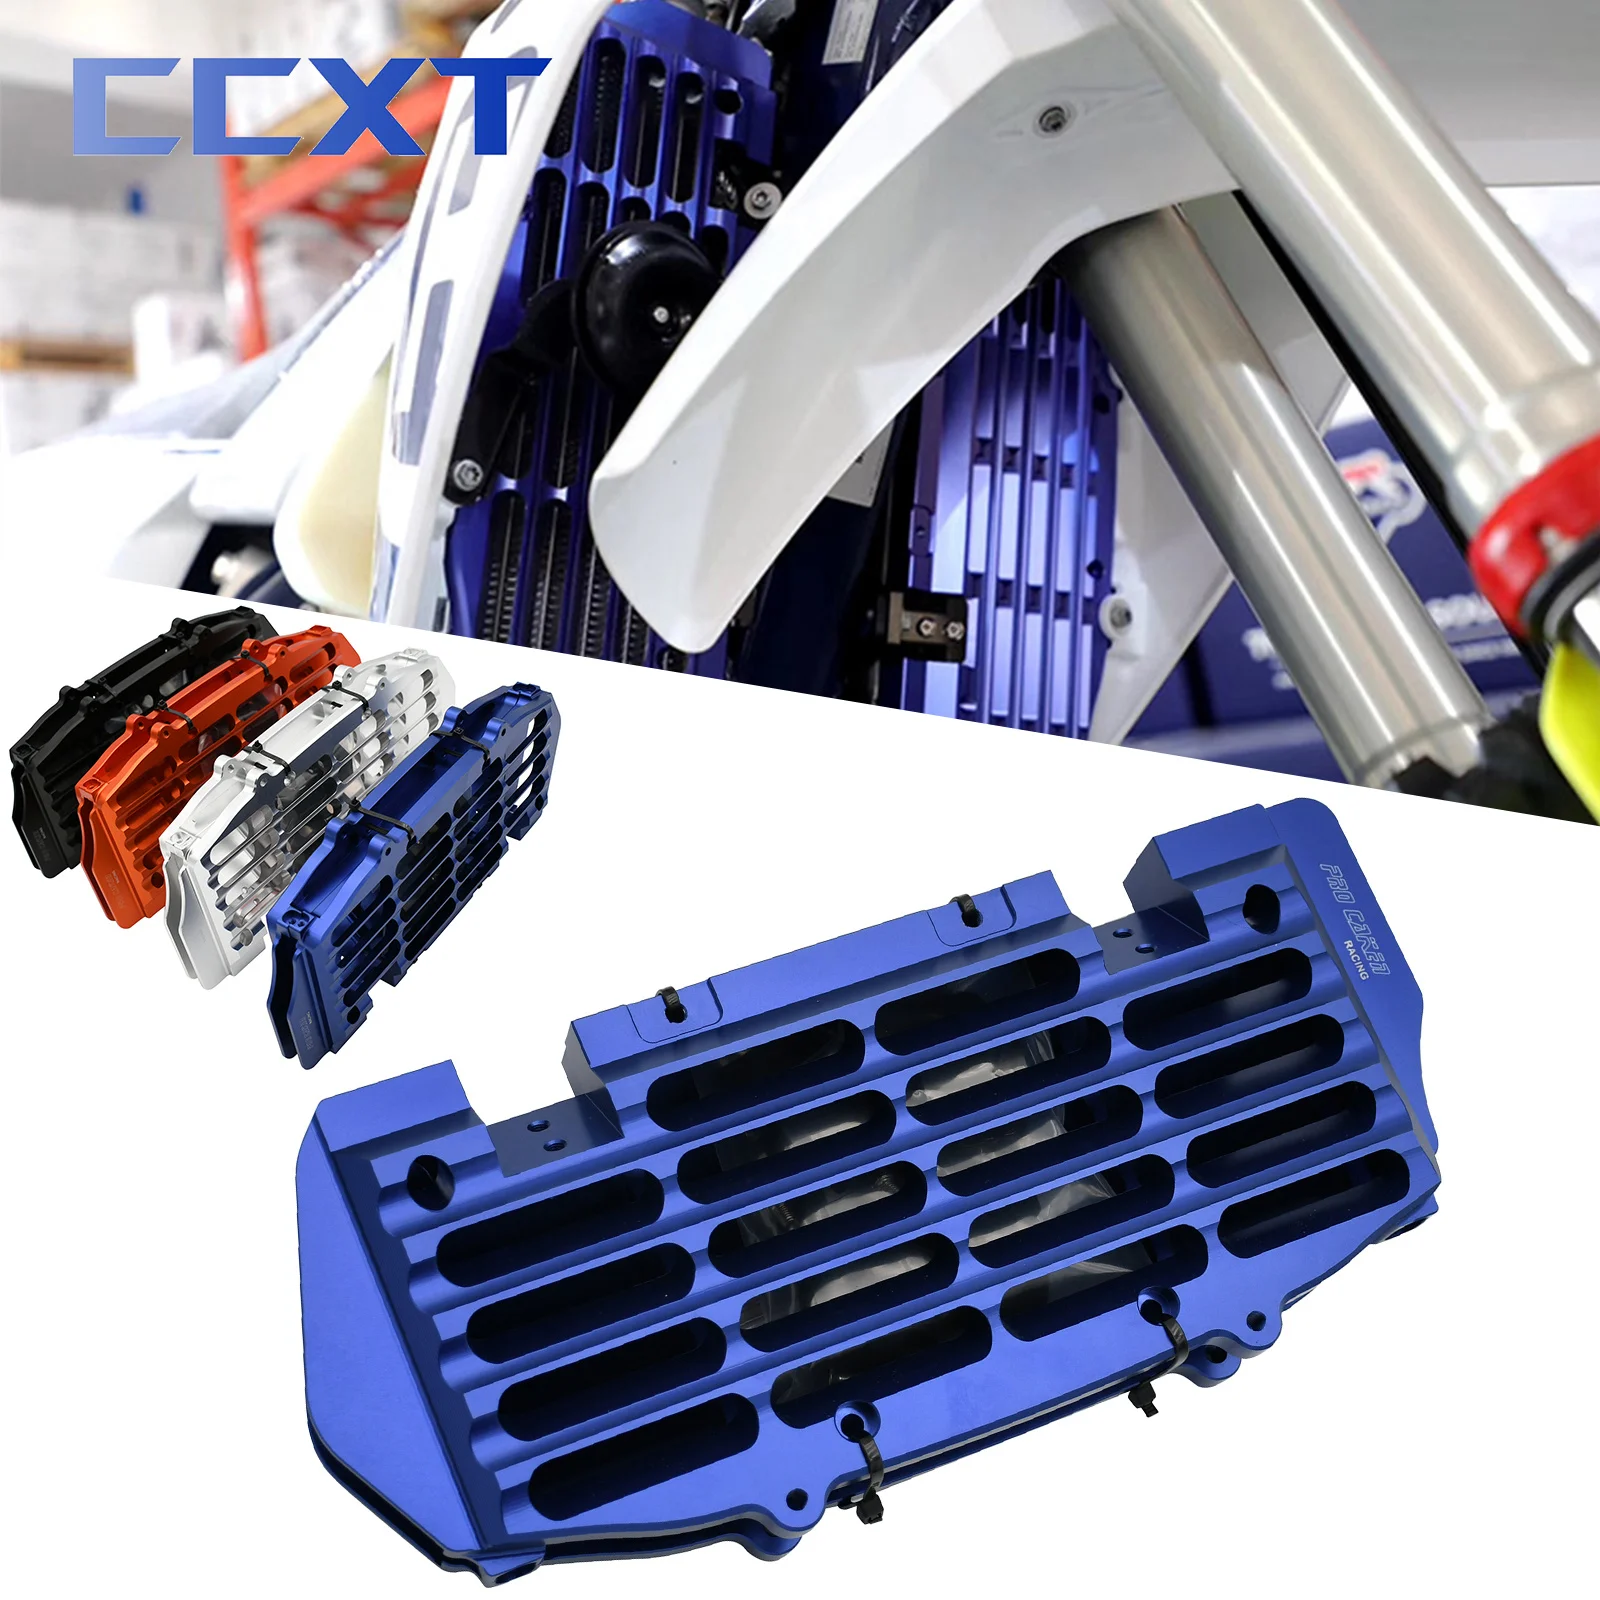 CNC Motorcycle Radiator Guard Grill Protector Grille Cover Cooler Fan For KTM SX SXF XC XCF XCW EXC EXCF Six Days TPI 125-500cc